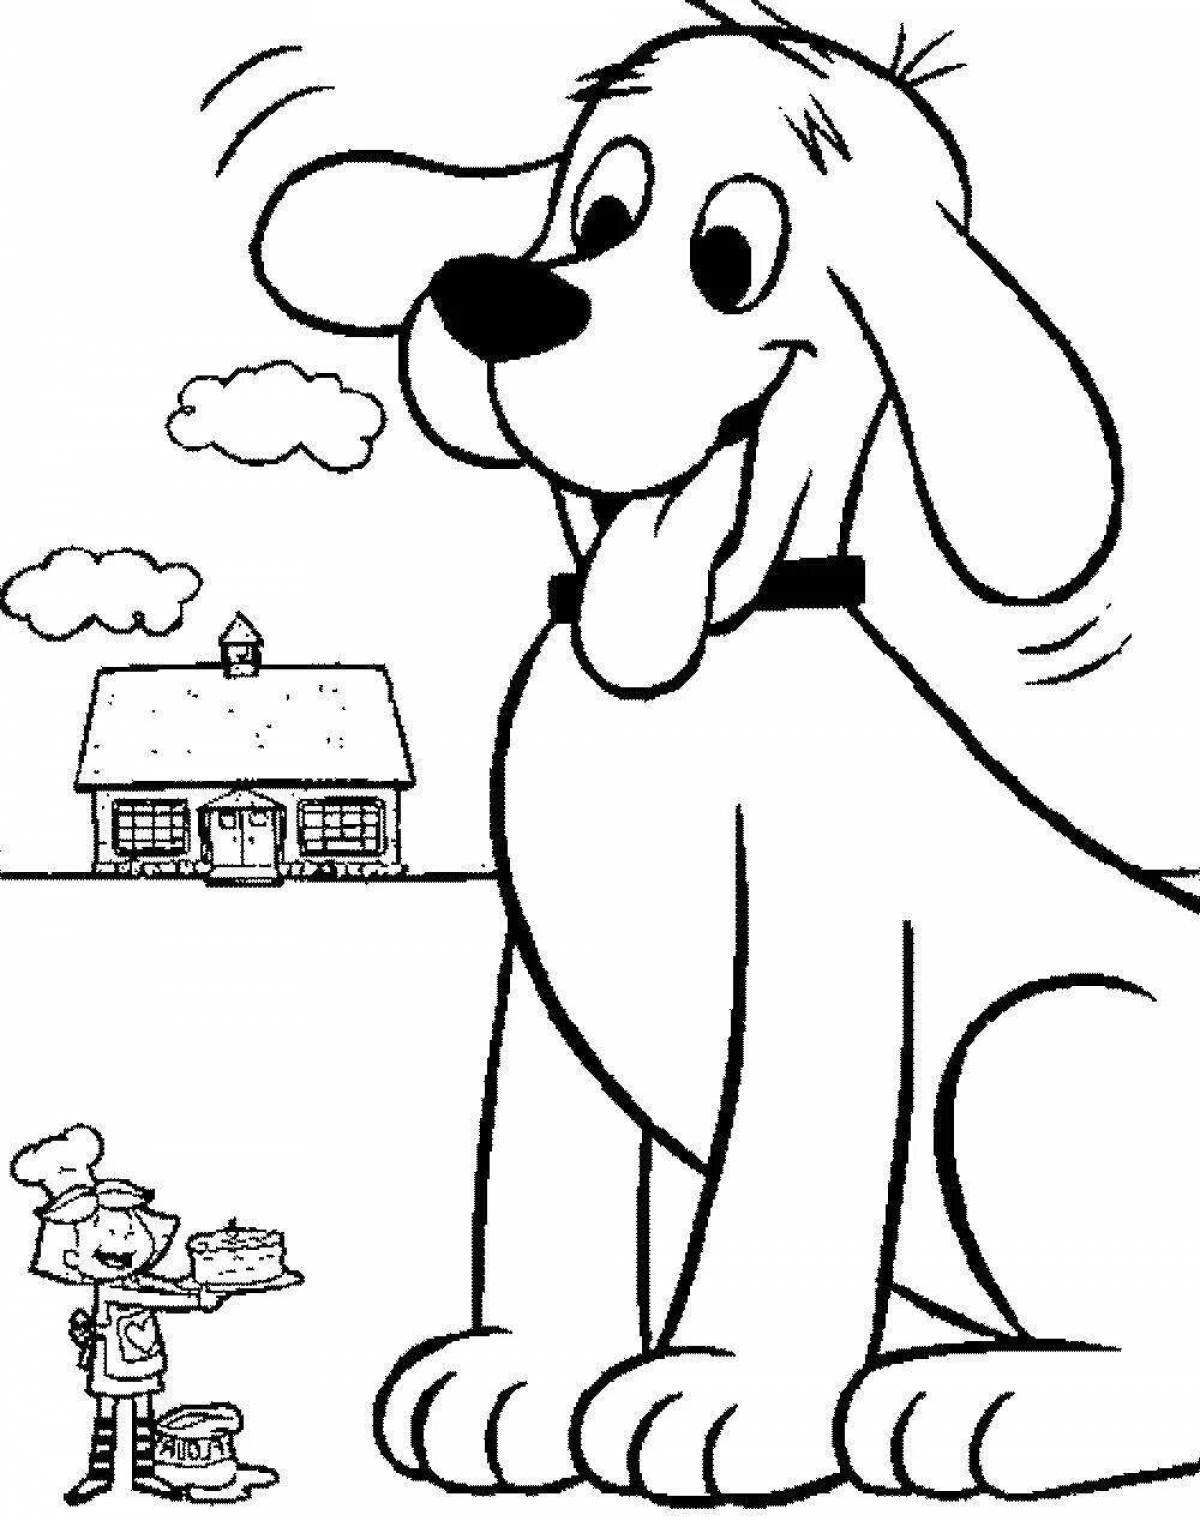 Brave dogs coloring pages for boys